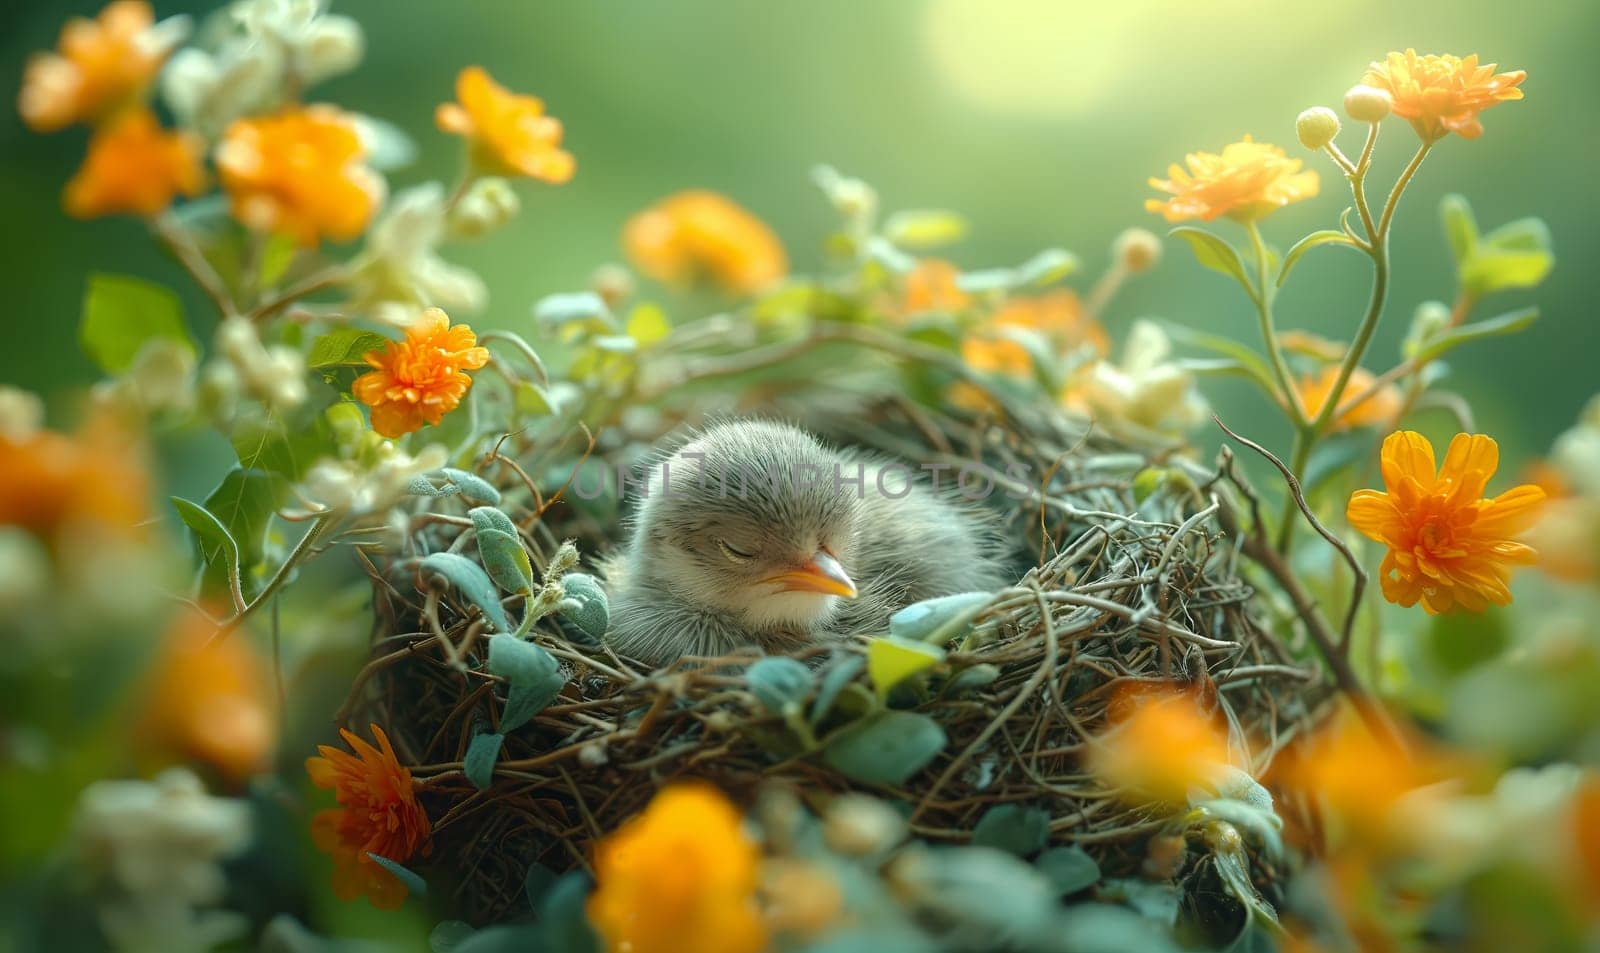 A young bird perched inside a nest, flowers all around.